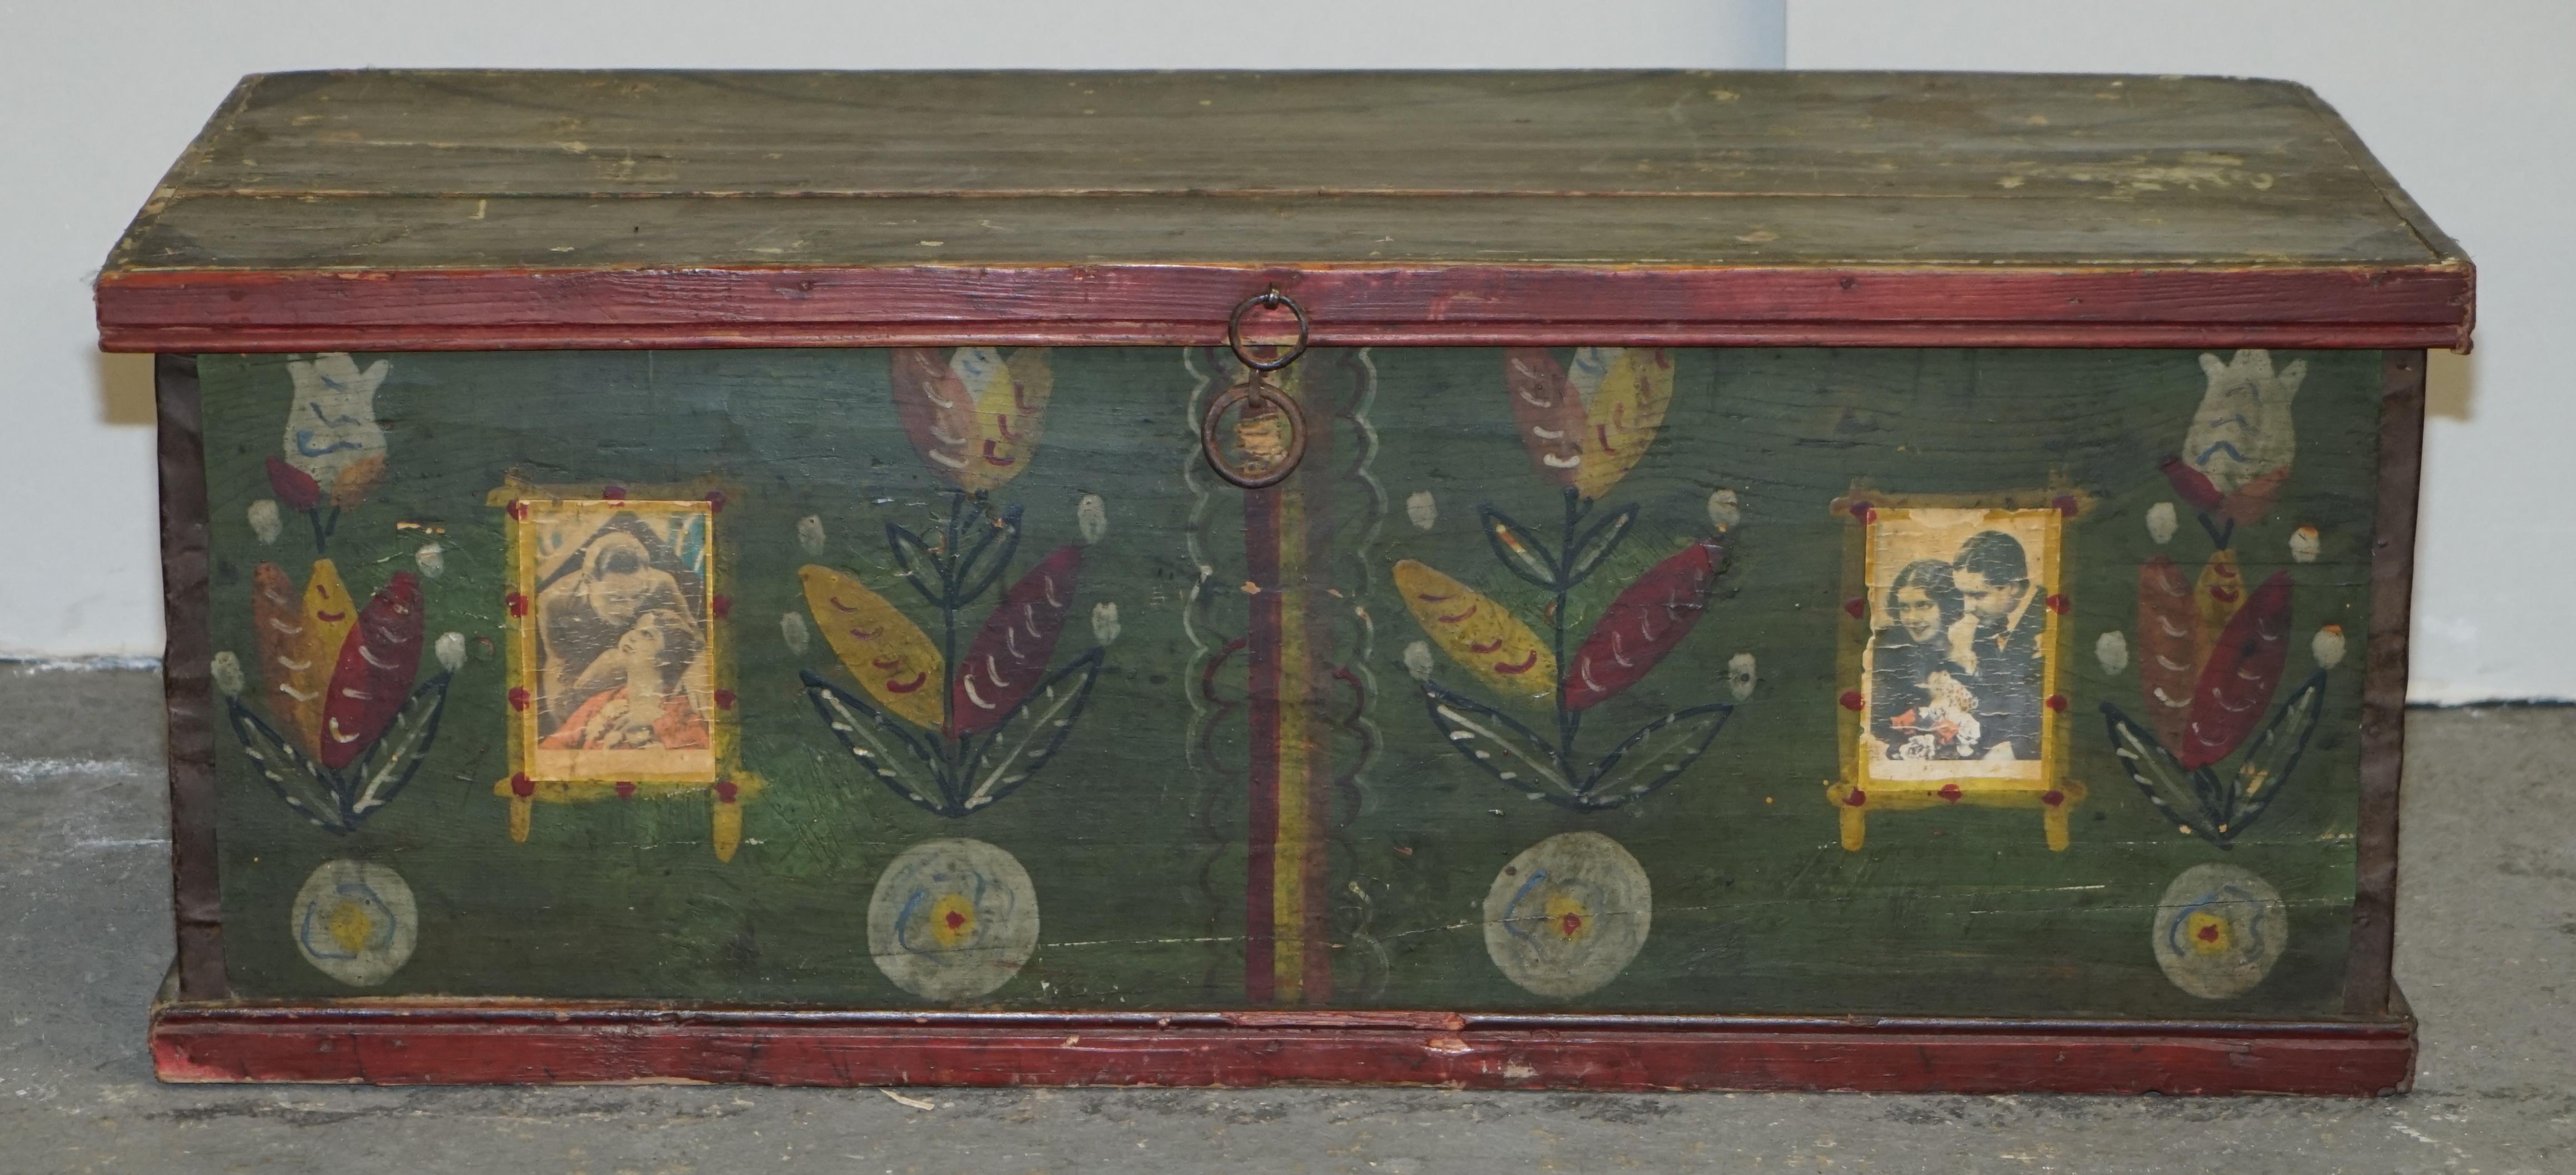 We are is delighted to offer for sale this stunning, circa 1900 hand painted Romanian clothes trunk or marriage coffer chest depicting married couple portraits and tulip paintings 

I have recently purchased a very large collection of these